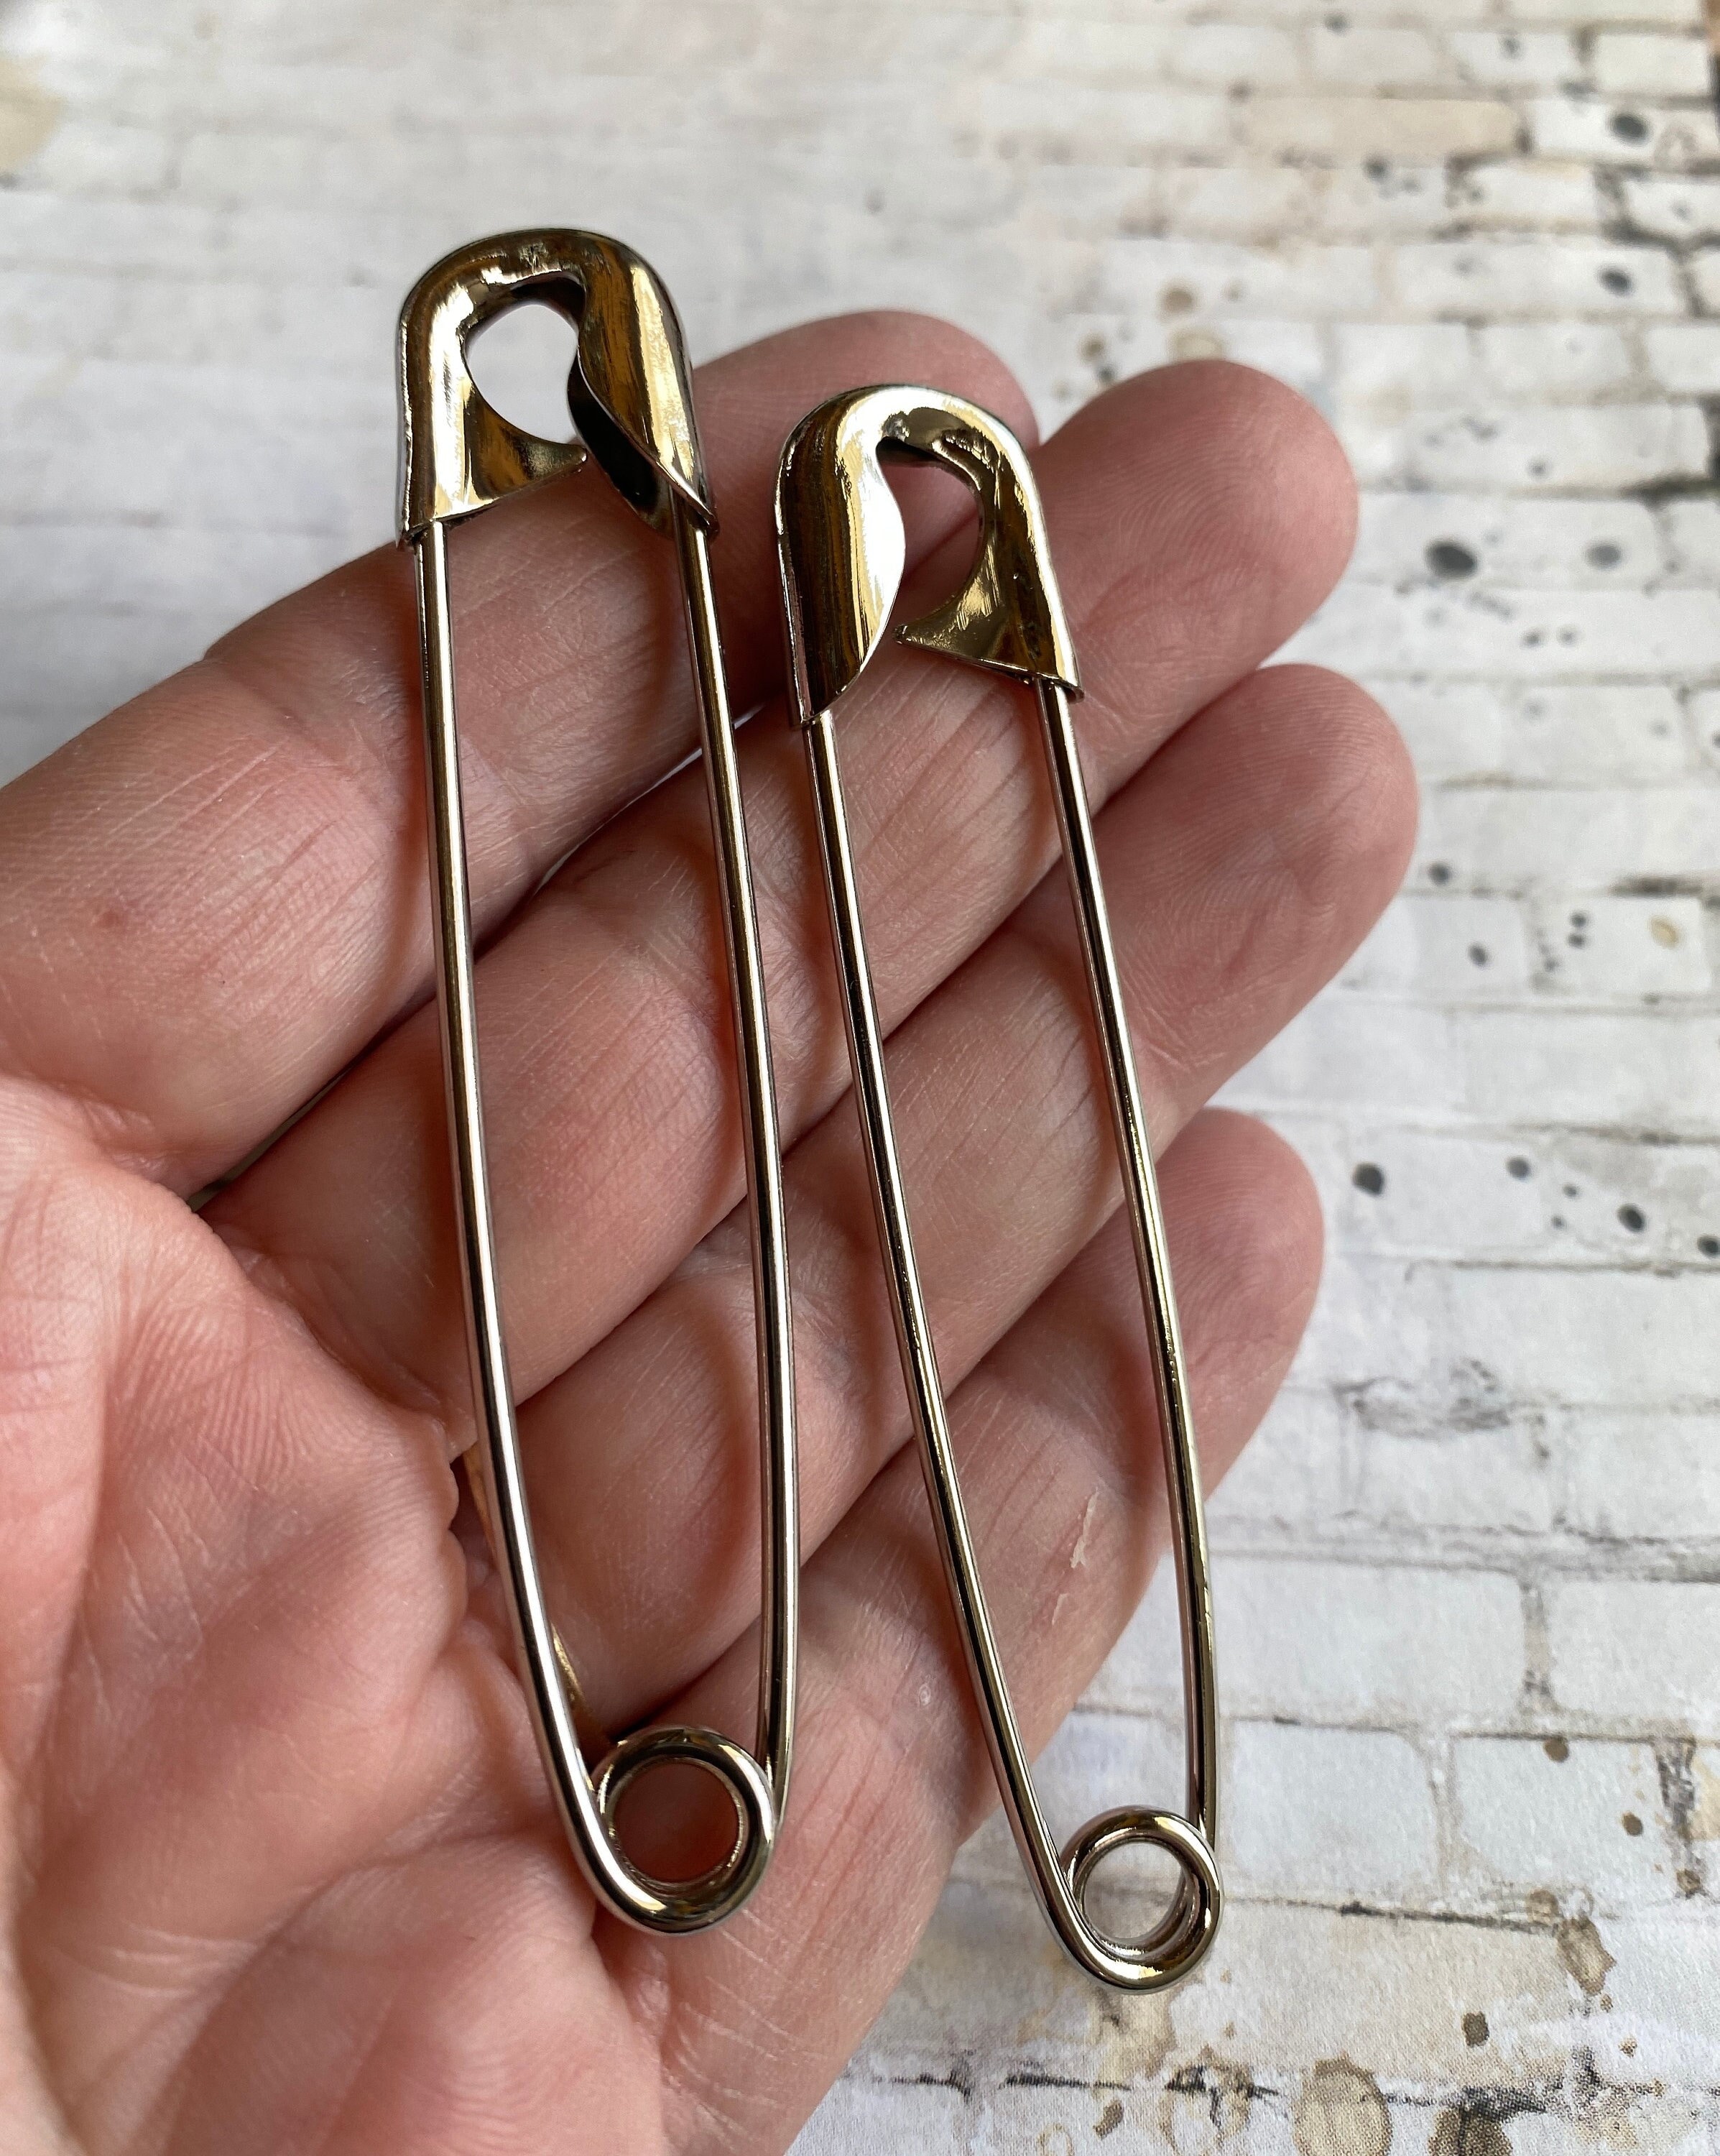 Huge Safety pins Large Safety Pin Big Over Sized Laundry Pins